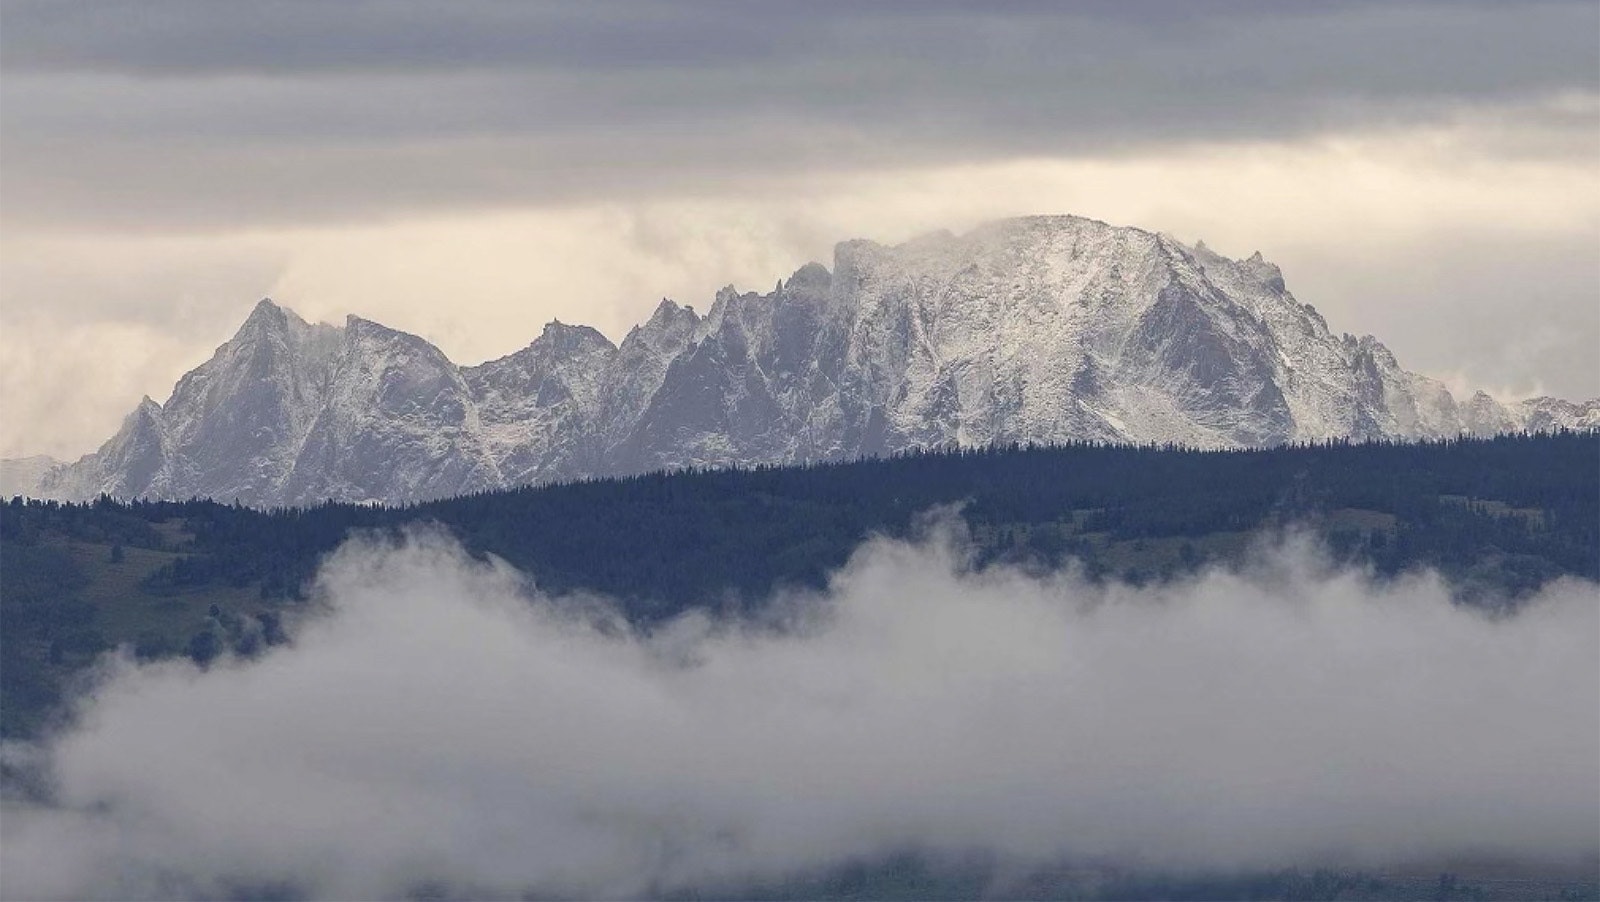 Fremont Peak in the Wind River Mountains is already getting into winter form with plenty of snow.